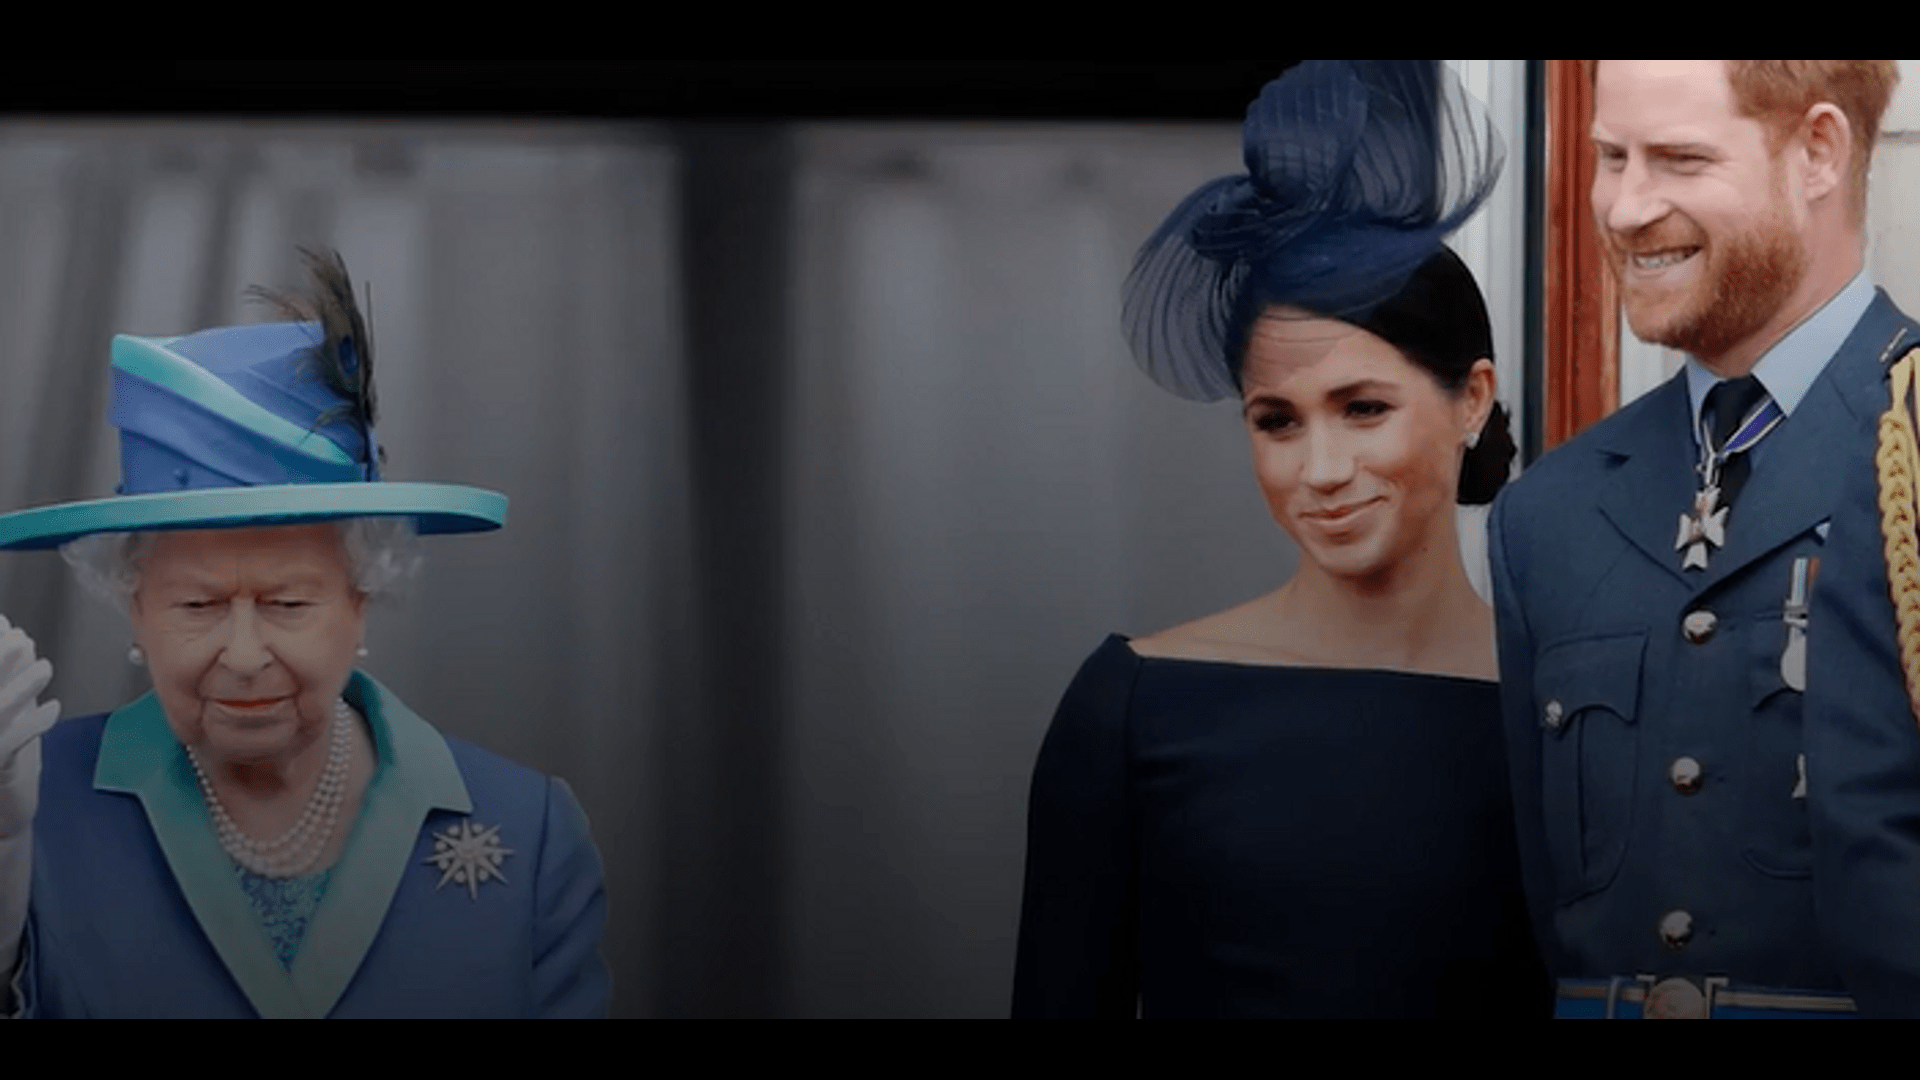 ”prince-harry-and-meghan-markle-join-their-children-for-the-queens-platinum-anniversary”